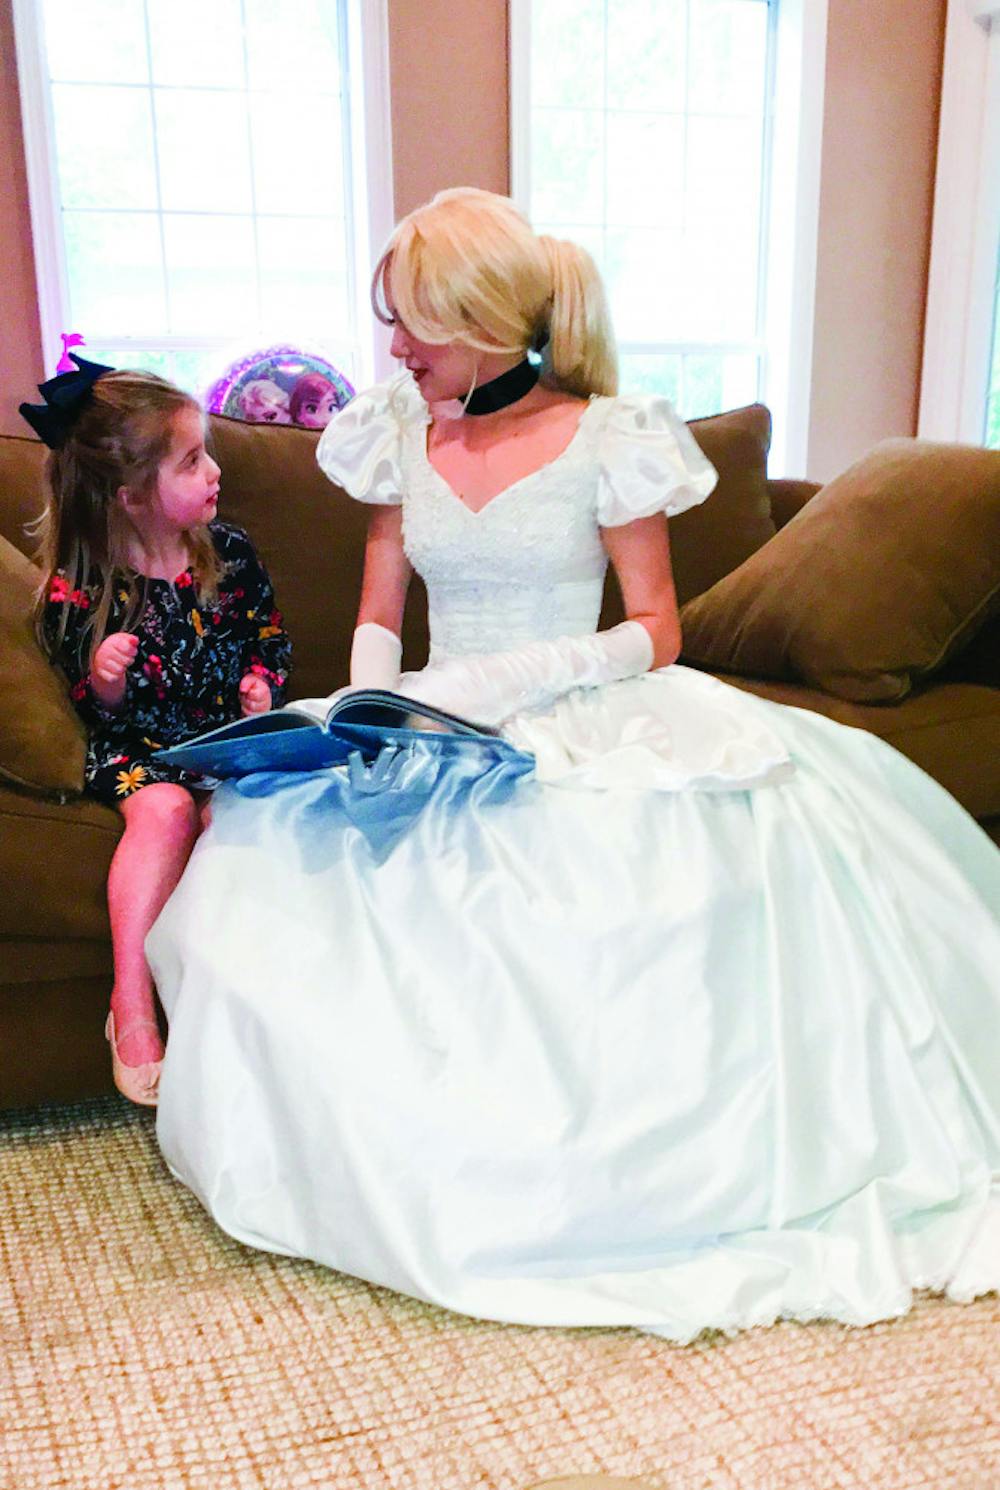 <p dir="ltr"><span>Dressed as Cinderella, Kailyn Allen, a 22-year-old UF law student, reads a book to 4-year-old Phoebe Dooley. Dooley was diagnosed with a terminal brain tumor in March 2016.</span></p><p><span> </span></p>